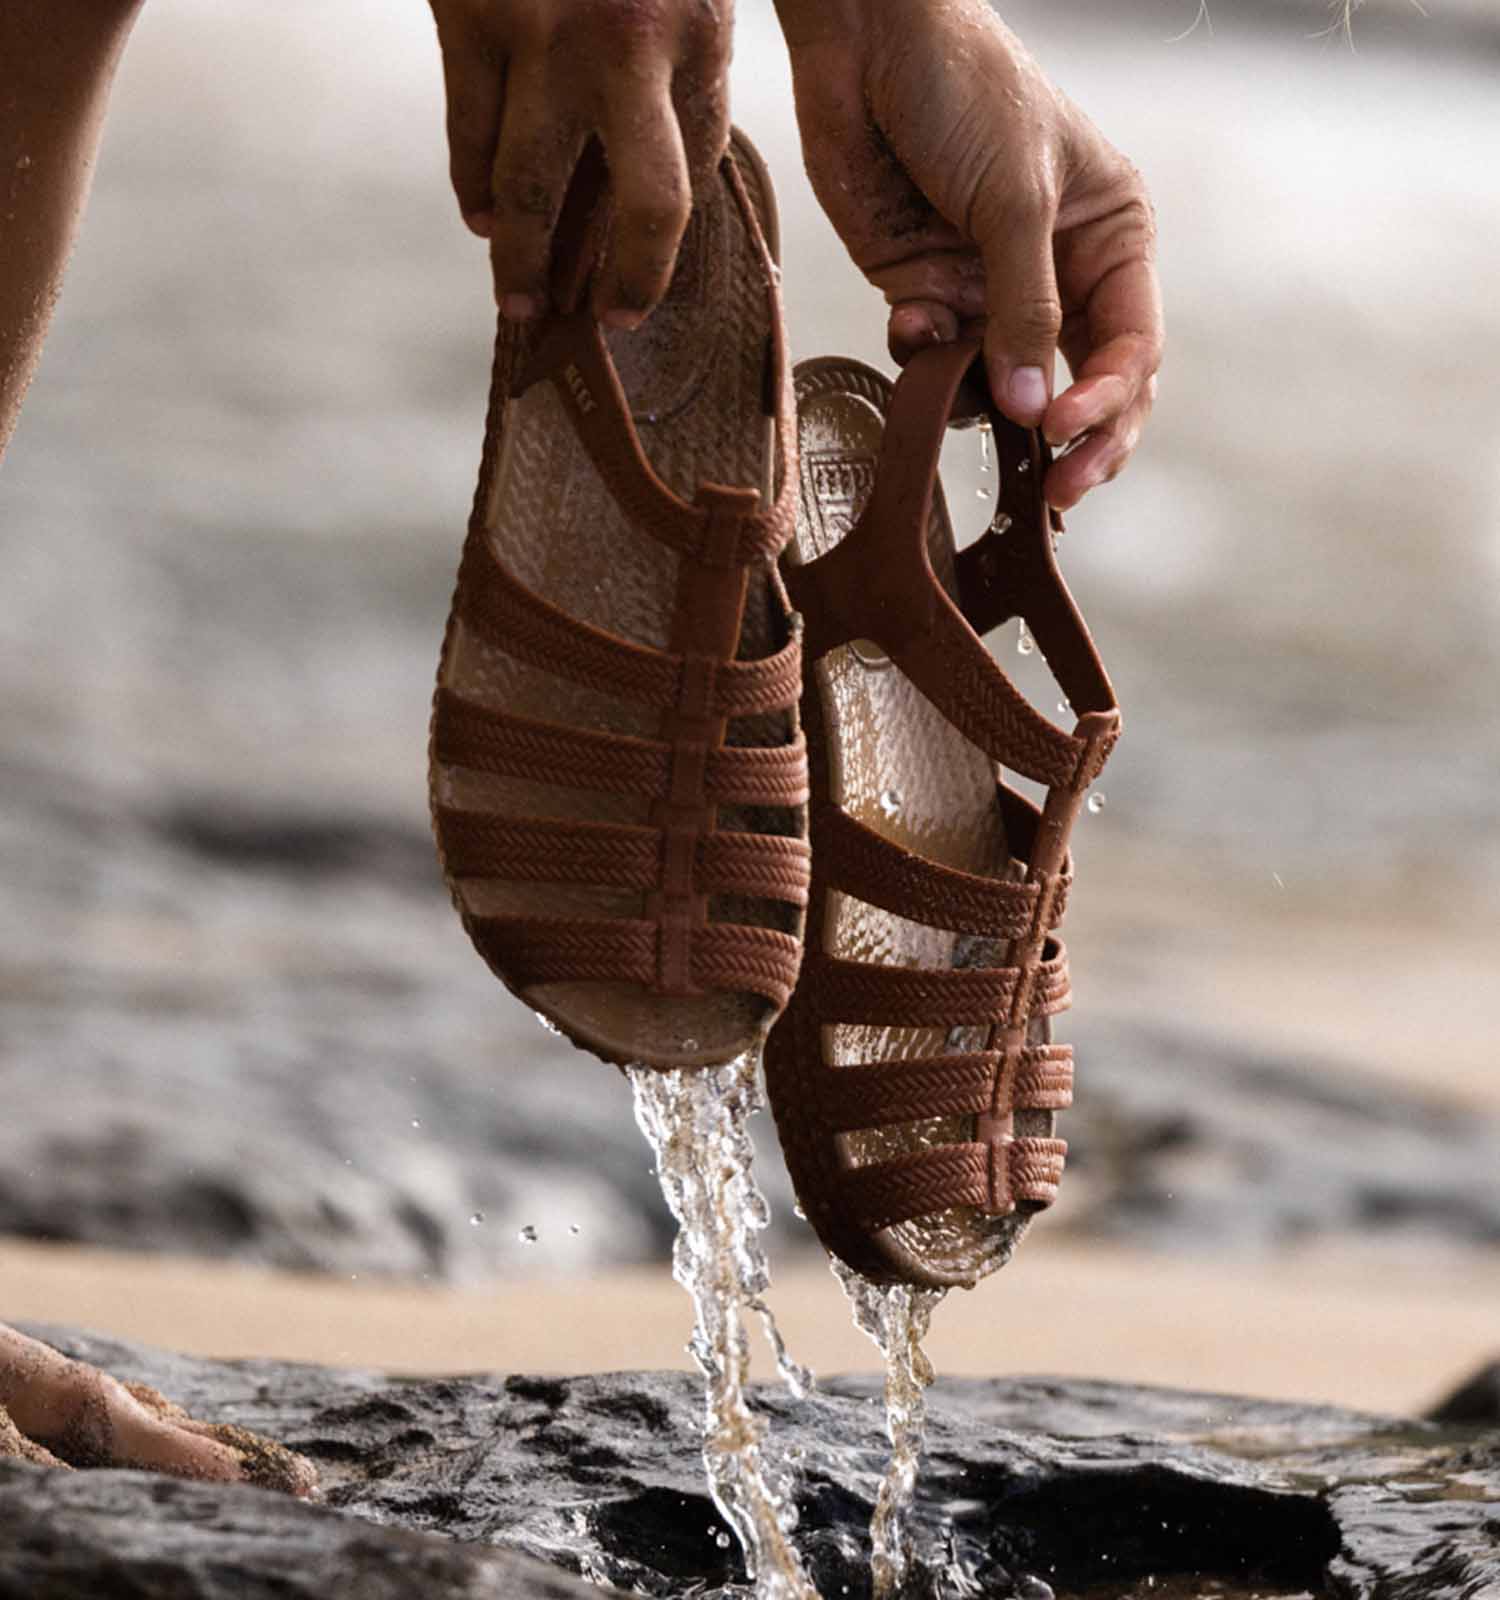 Closeup of woman's hands holding Reef brand sandals in the ocean